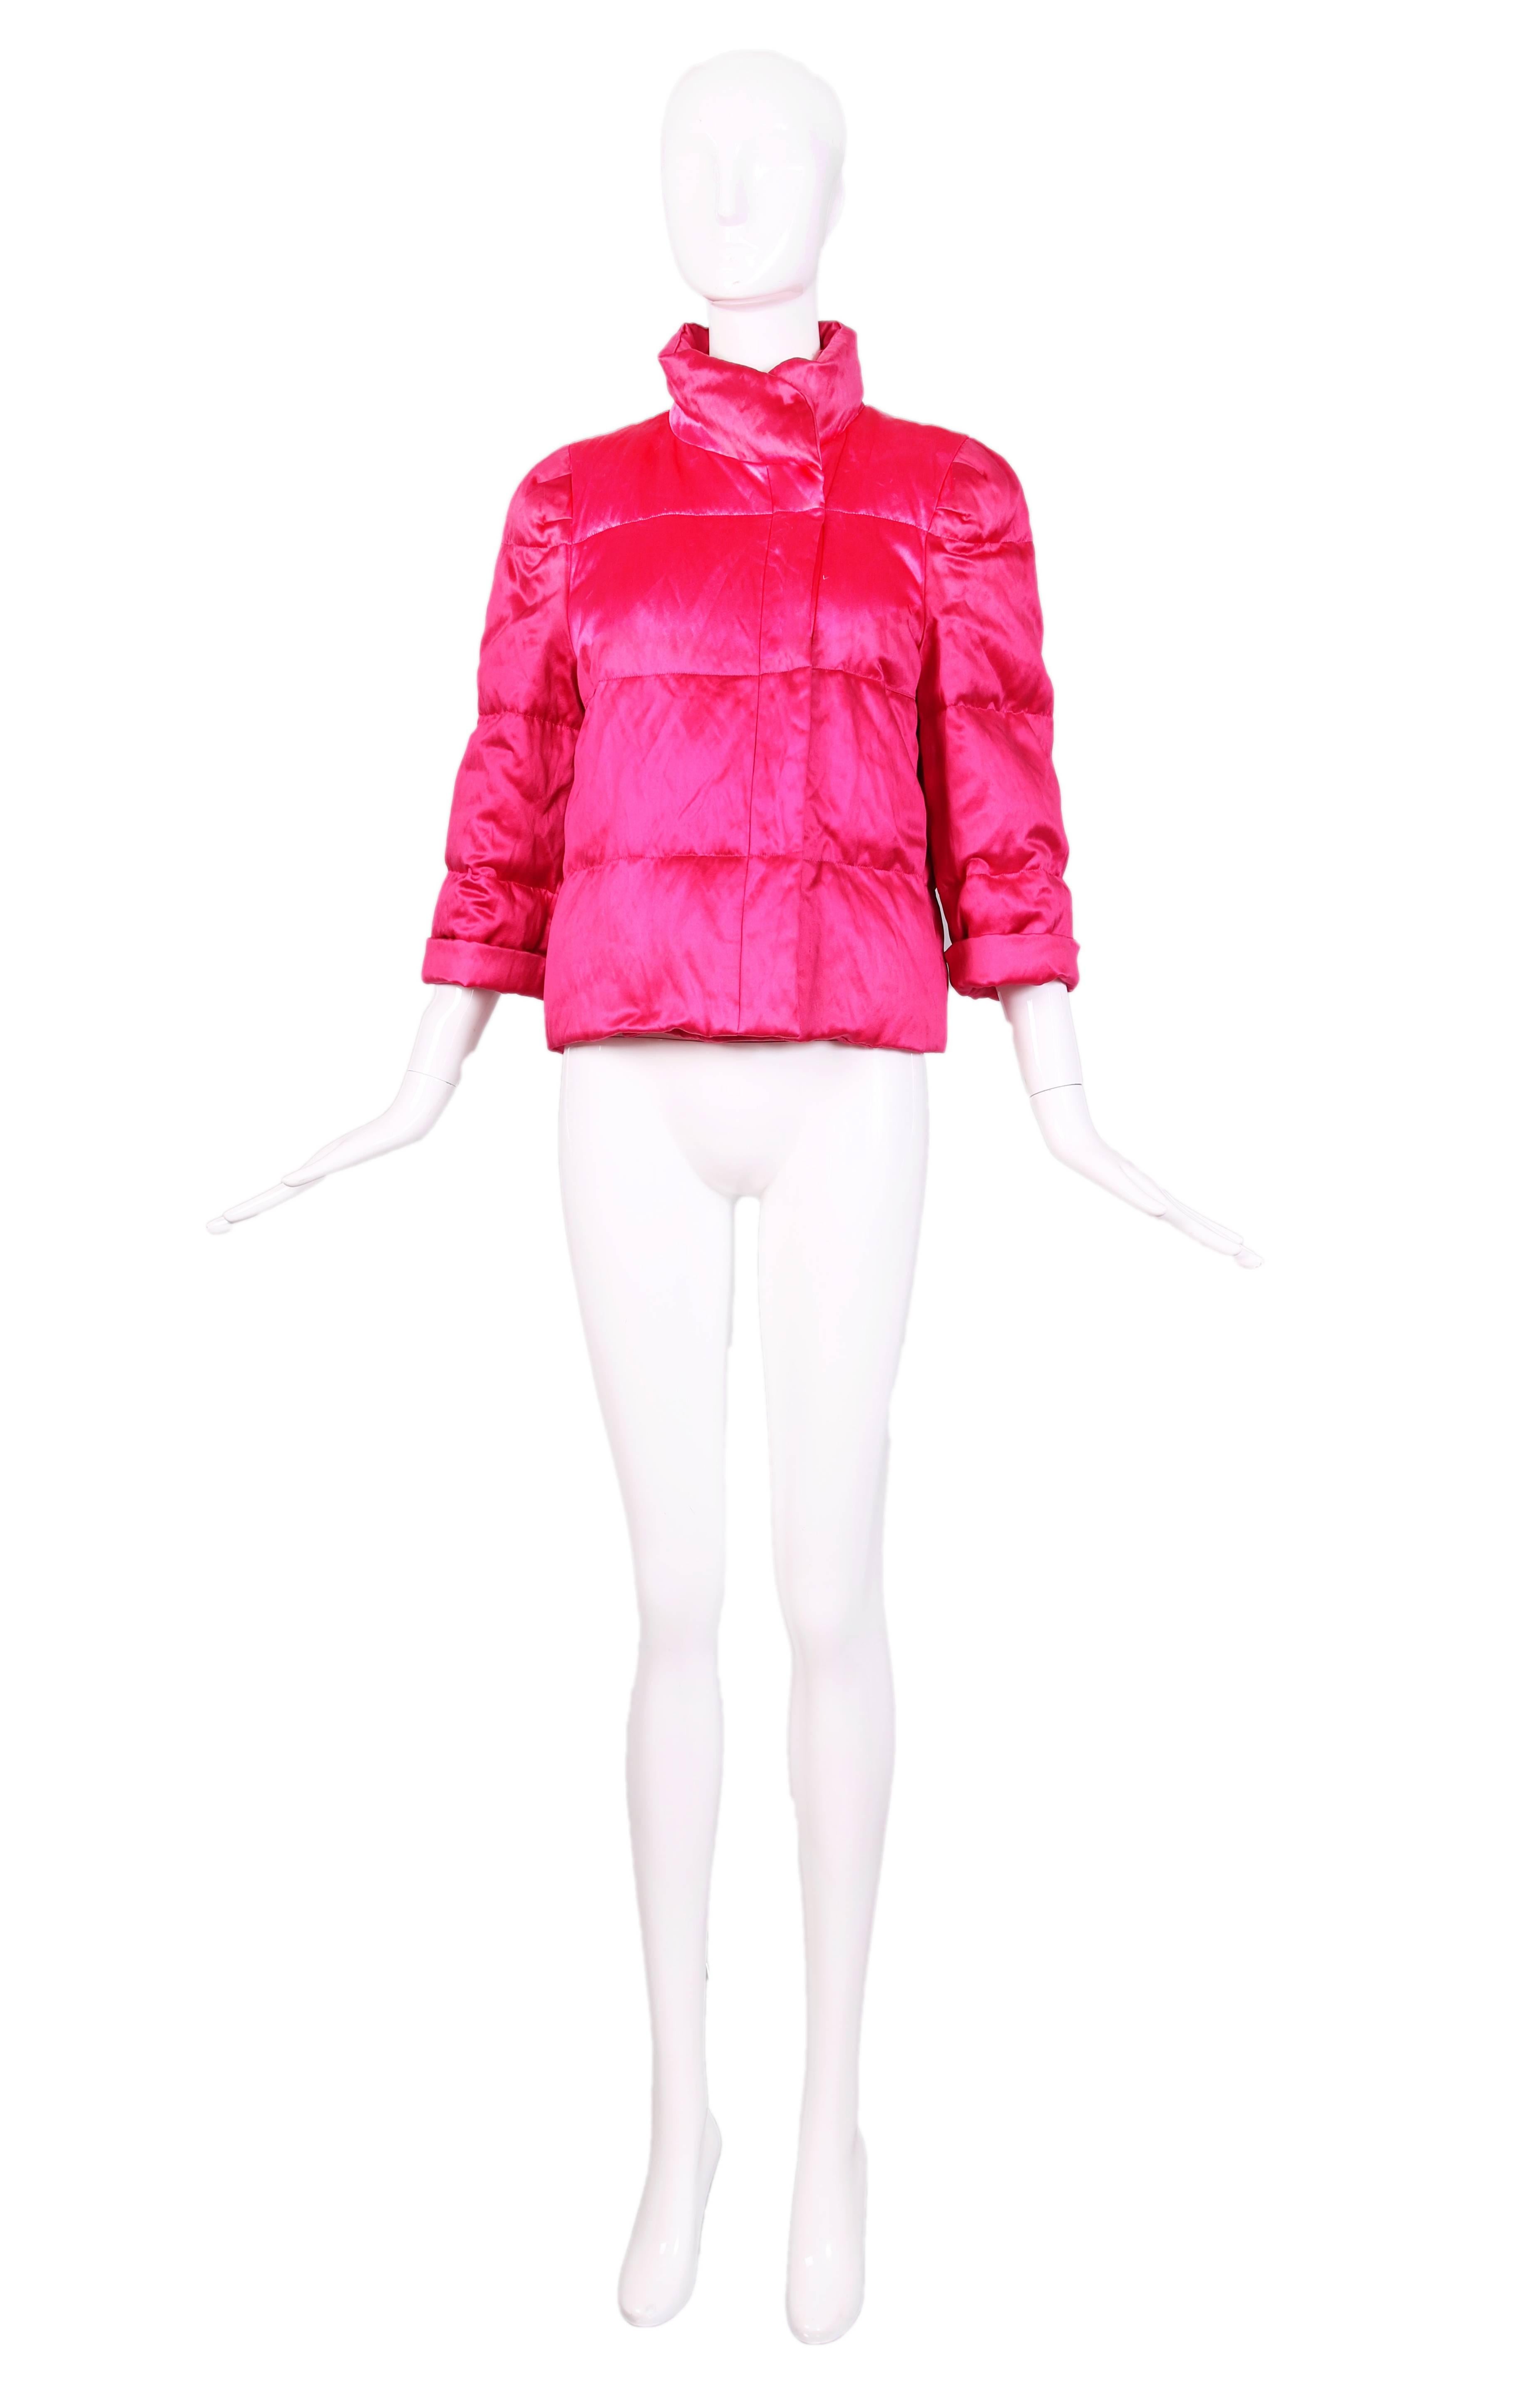 Dries Van Noten hot pink silk and cotton blend puffer jacket with hook and eye closures and pocket at interior. Filling is 80% down and 20% feathers. In excellent condition and original tags priced at $1,410. Size EU 40.
MEASUREMENTS (in